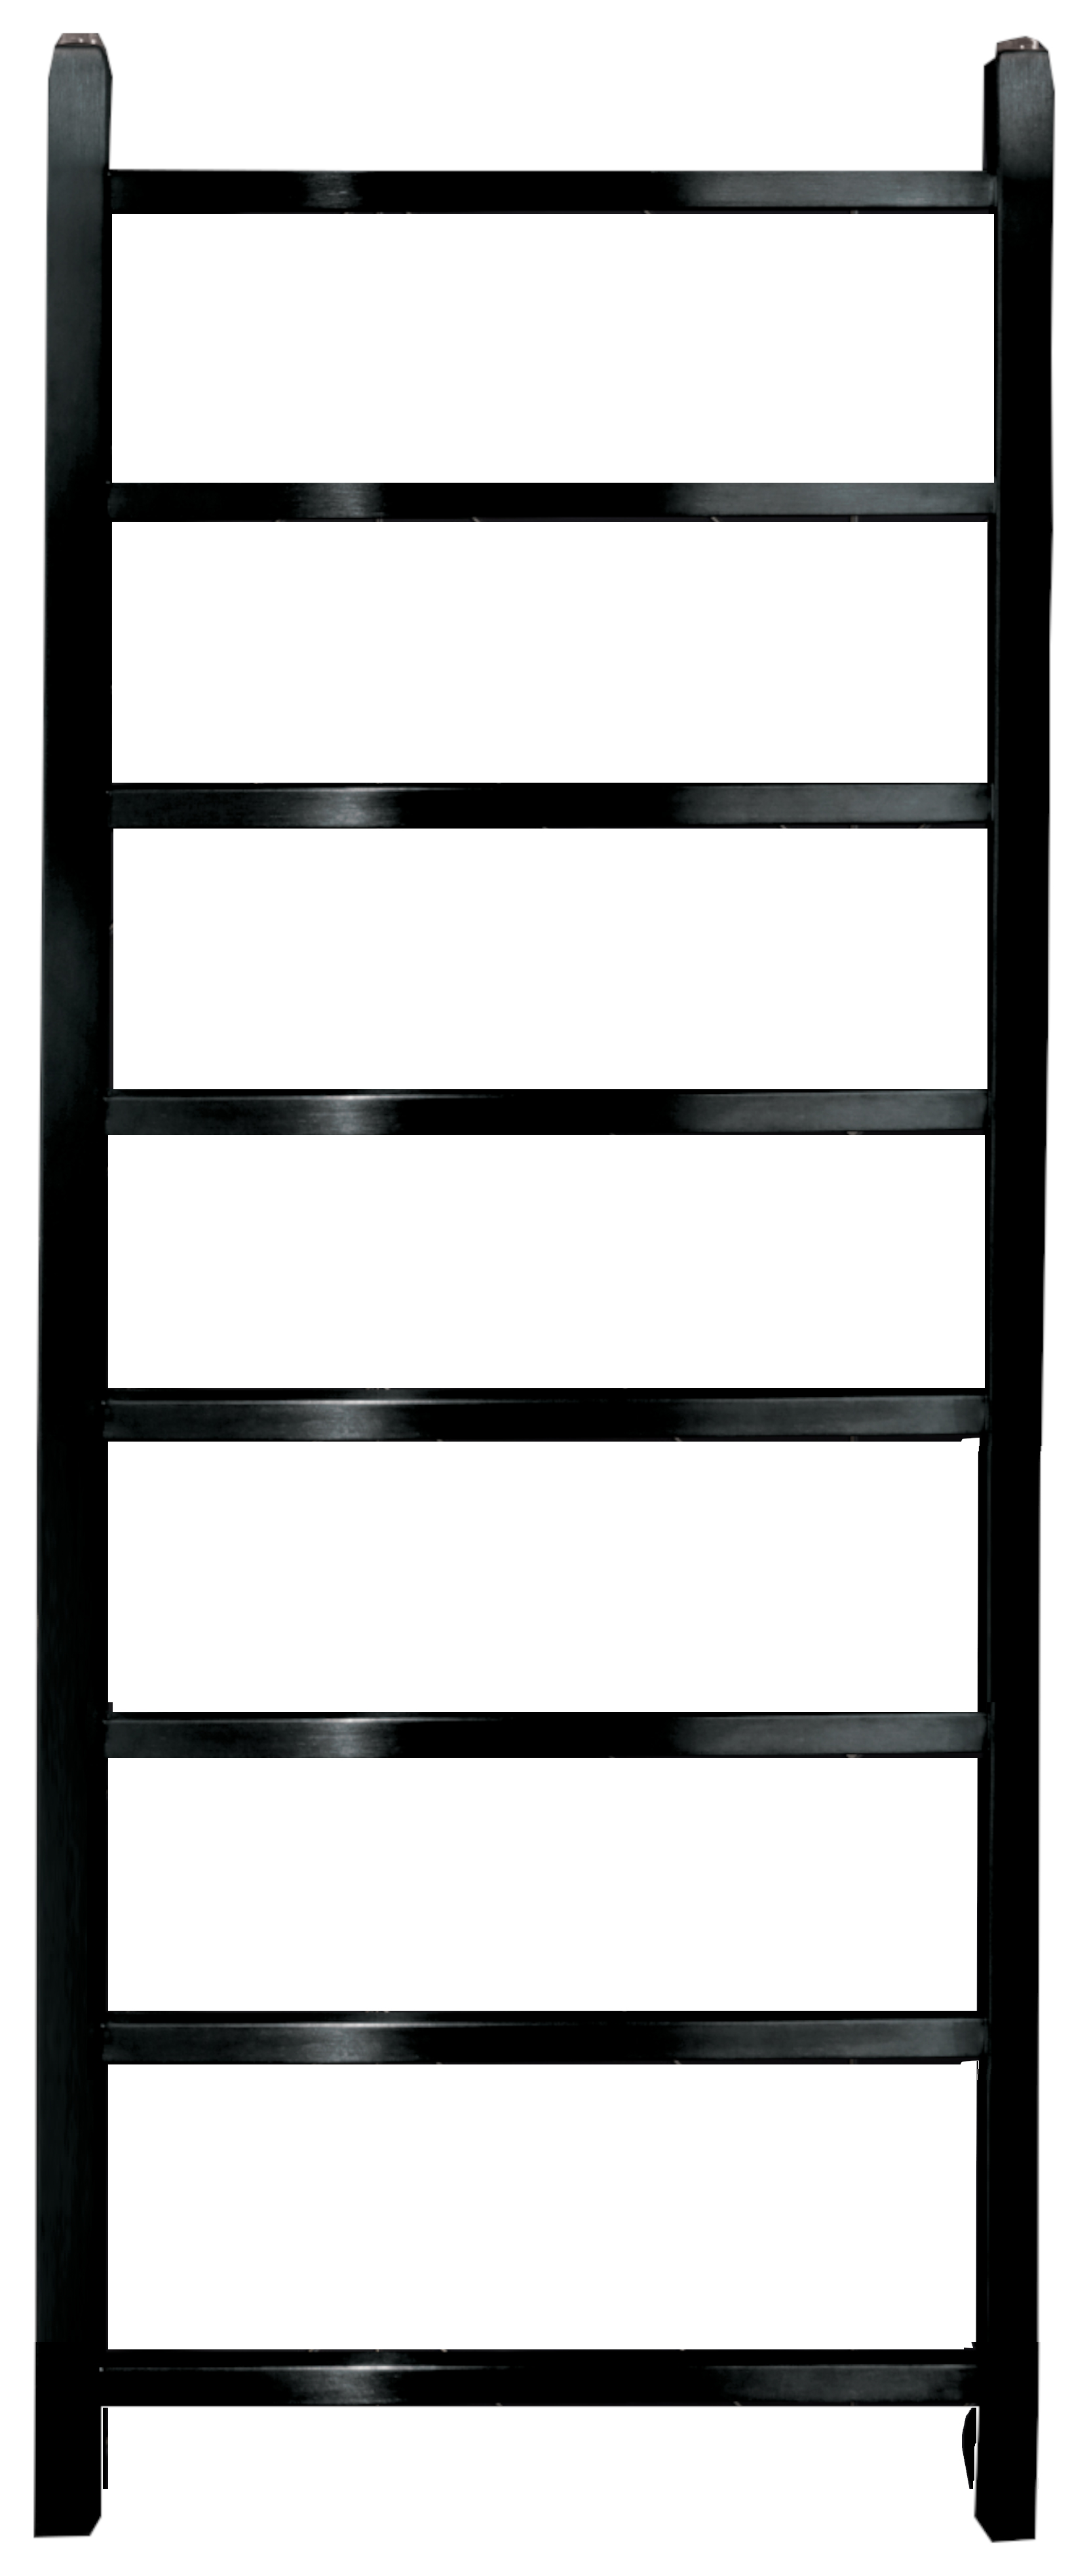 Towelrads Diva Brushed Black Chrome Dry Electric Non Thermostatic Towel Radiator - 1200 x 500mm